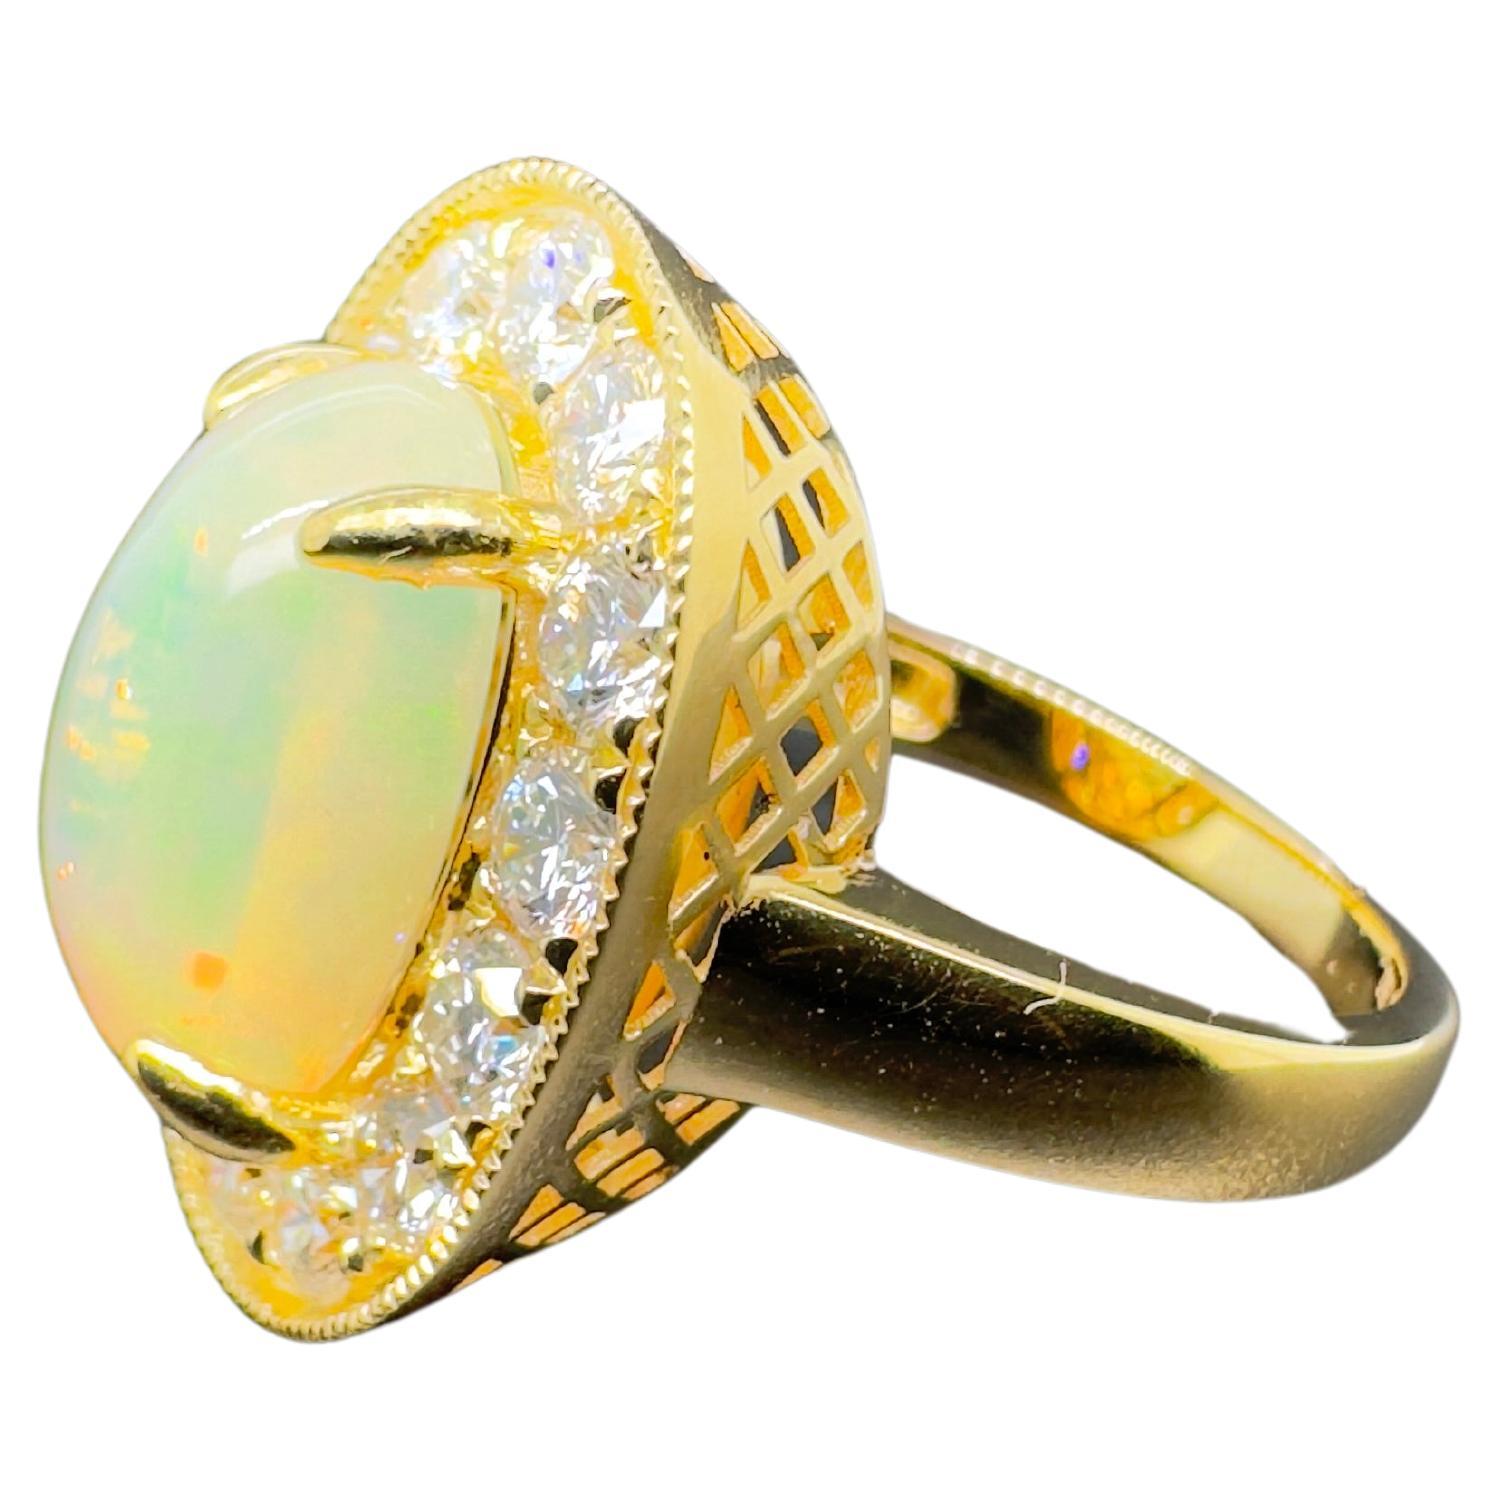 This gorgeous Ethiopian opal is set in 18k yellow gold round brilliant diamonds.  The opal displays orange and green flashes while the white brilliant diamonds accent the center stone.  The edges add a nice touch to finish out this classic ring